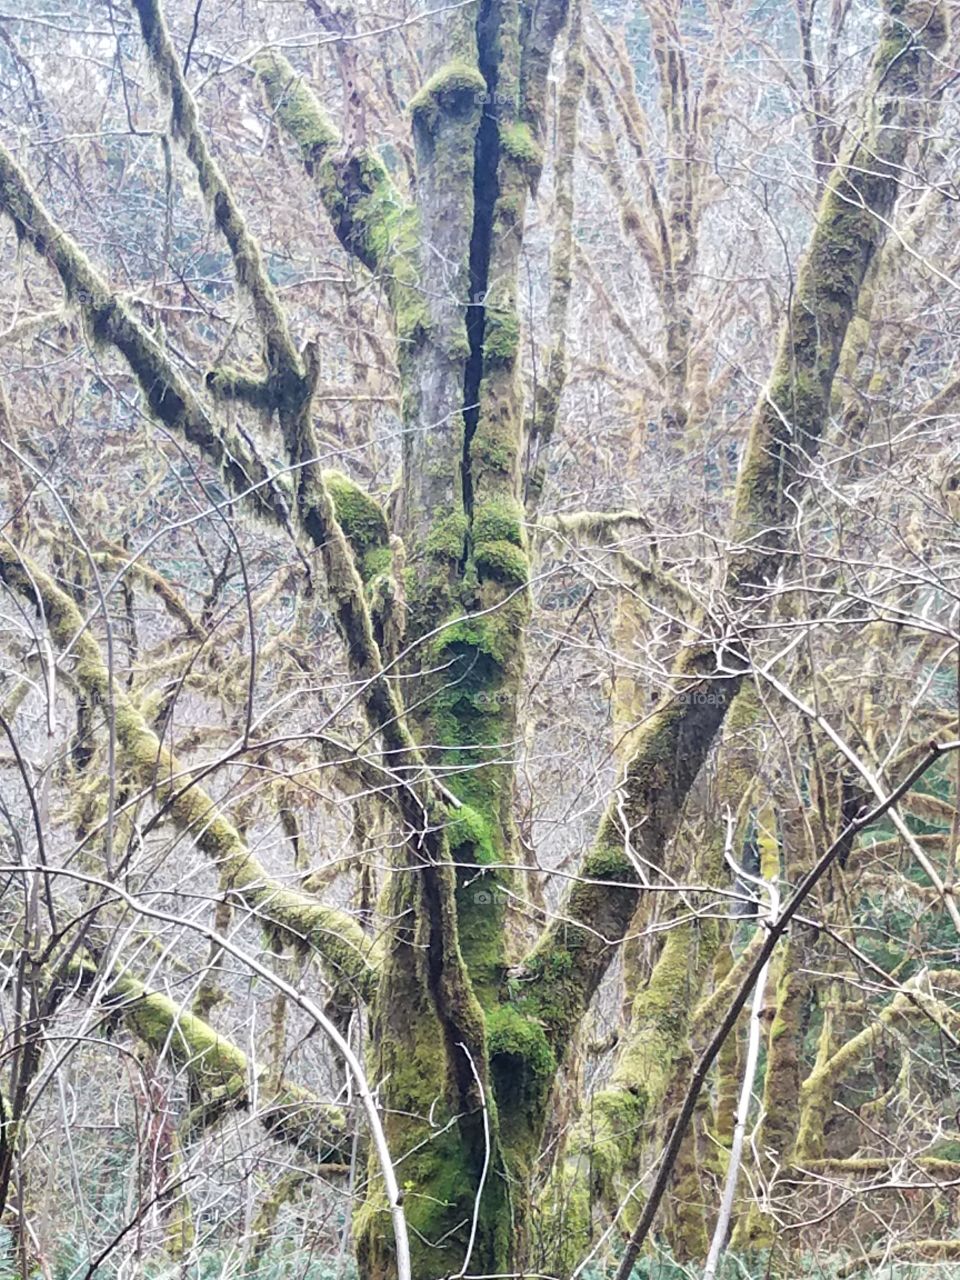 Ents still exist if you know where to look. Pay attention to the life around you. And let your imagination run free.